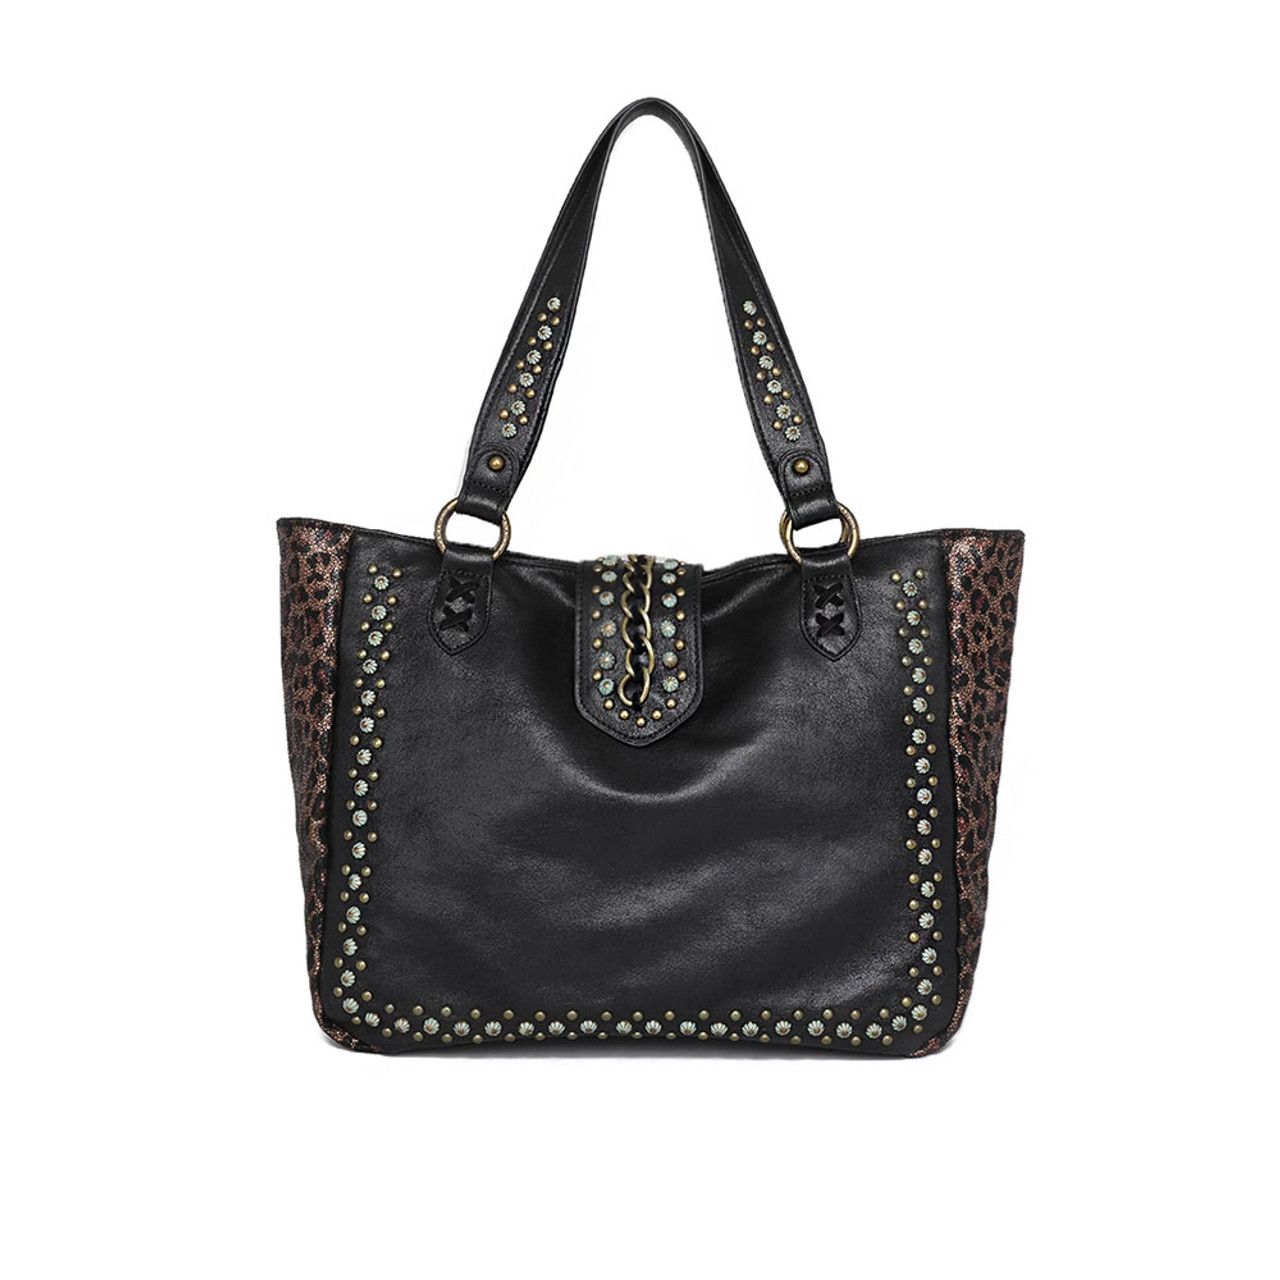 Midi Zipper Tote: Black Leopard Coated Canvas Just $78 with FREE STRAP